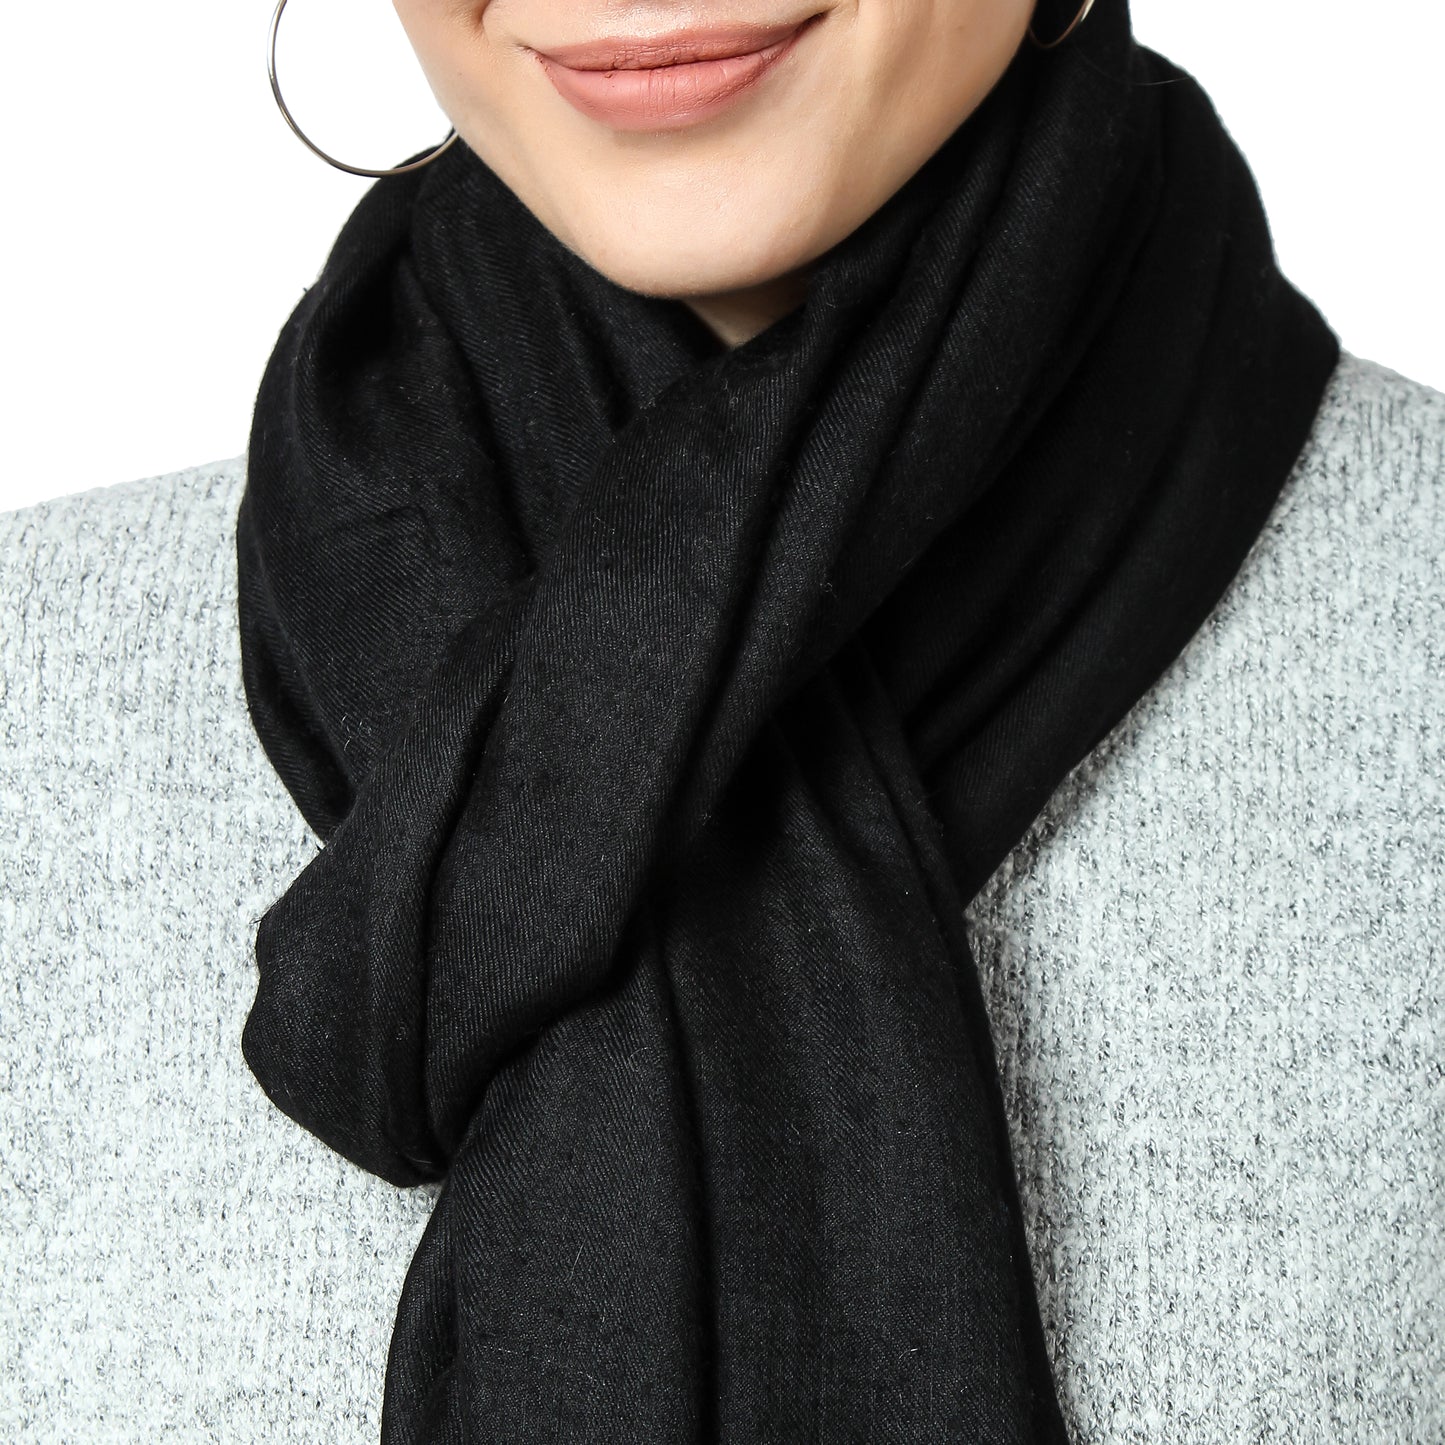 Close-up image of a black cashmere scarf knotted around a woman's neck. The knot is positioned in the center, and the ends of the scarf are neatly tucked in. The soft and luxurious texture of the scarf is visible, and the black color adds to its elegance and versatility. The image focuses on the knot and the way the scarf drapes around the woman's neck, adding a touch of sophistication to her outfit.